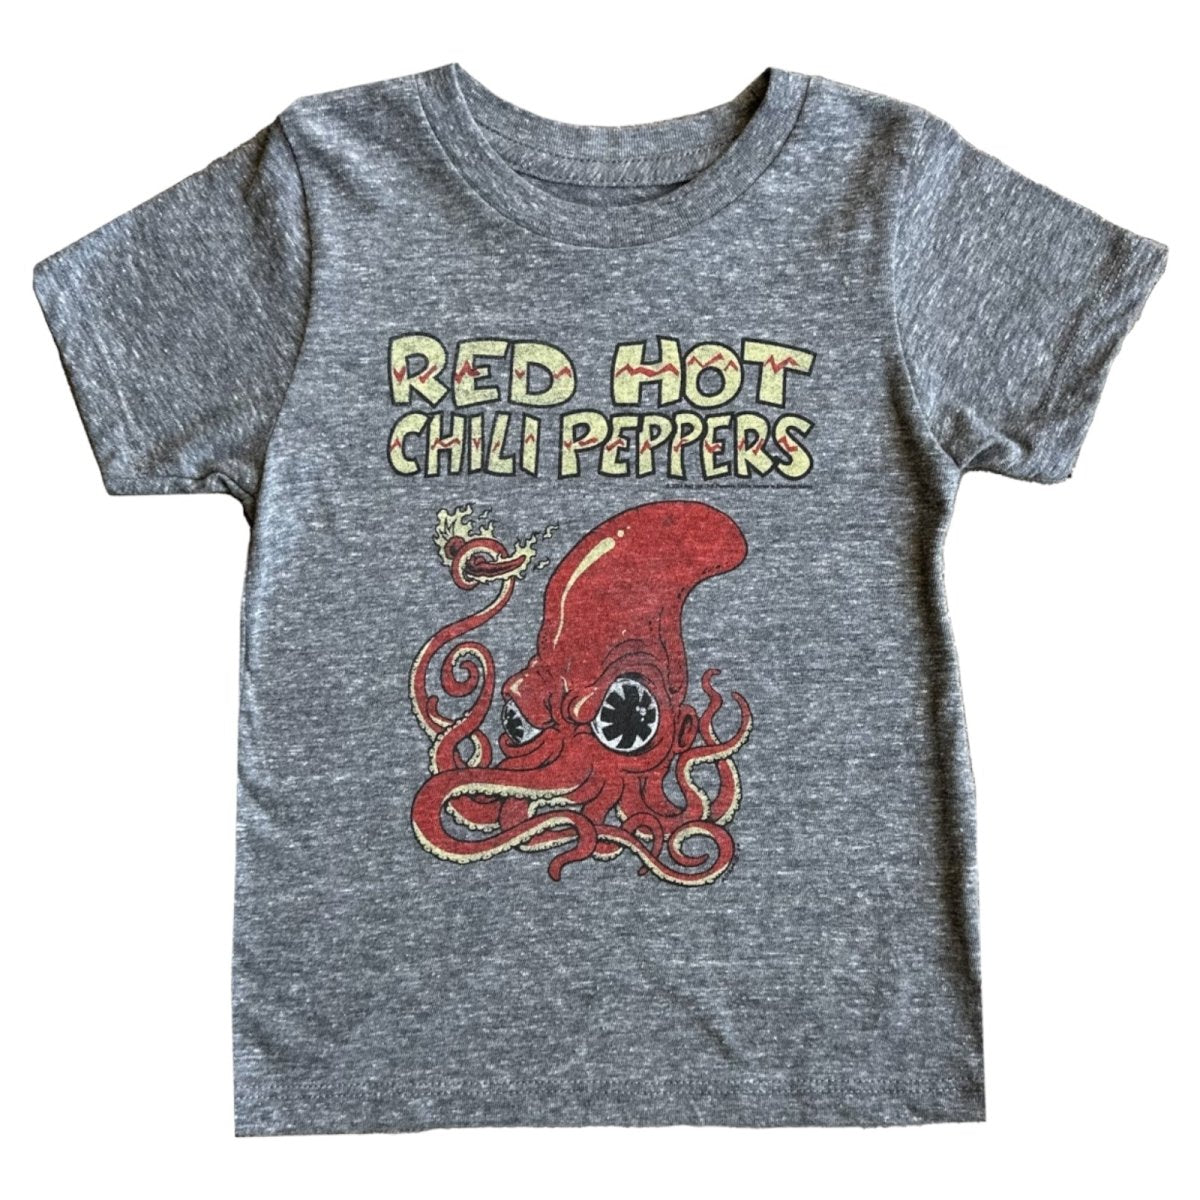 RED HOT CHILI PEPPERS TSHIRT - ROWDY SPROUT